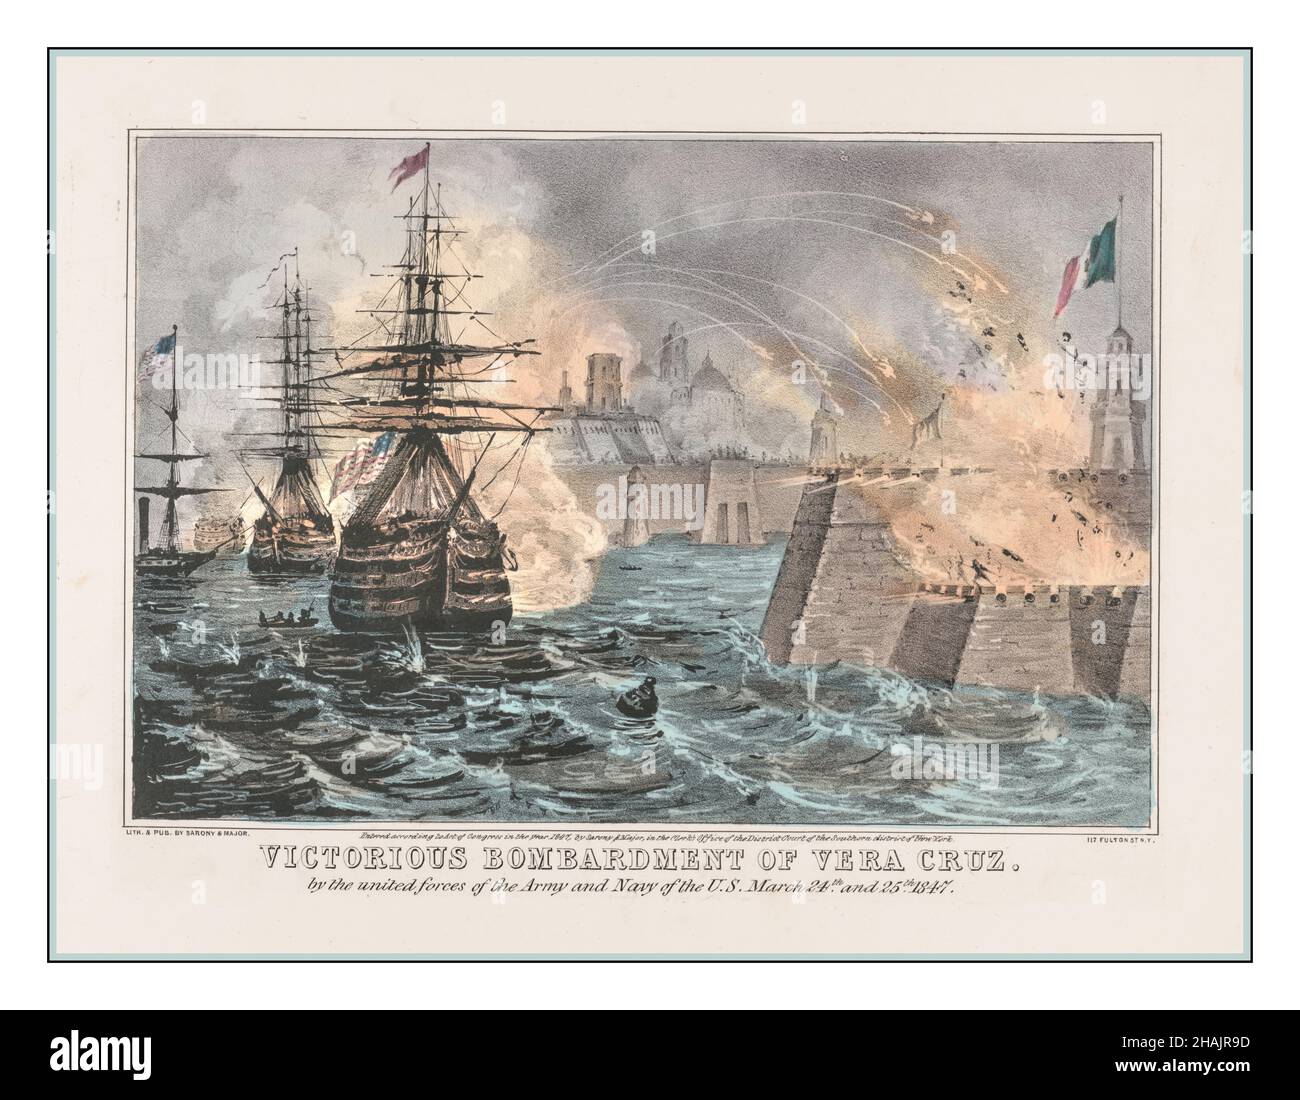 Victorious bombardment of Vera Cruz Vintage 1847 Lithograph shows American battleships bombarding the fort at Veracruz, Mexico. Sarony & Major, lithographer [New York] : Lith. & Pub. by Sarony & Major, 117 Fulton St. N.Y., [1847] -  Mexican War, 1846-1848--Naval operations--American -  Bombardment--Mexico--Veracruz (Veracruz-Llave)--1840-1850 -  Forts & fortifications--Mexico--Veracruz (Veracruz-Llave)--1840-1850 -  Naval warfare--American--Mexico--Veracruz (Veracruz-Llave)--1840-1850 Lithographs Hand-colored 1840-1850. Stock Photo